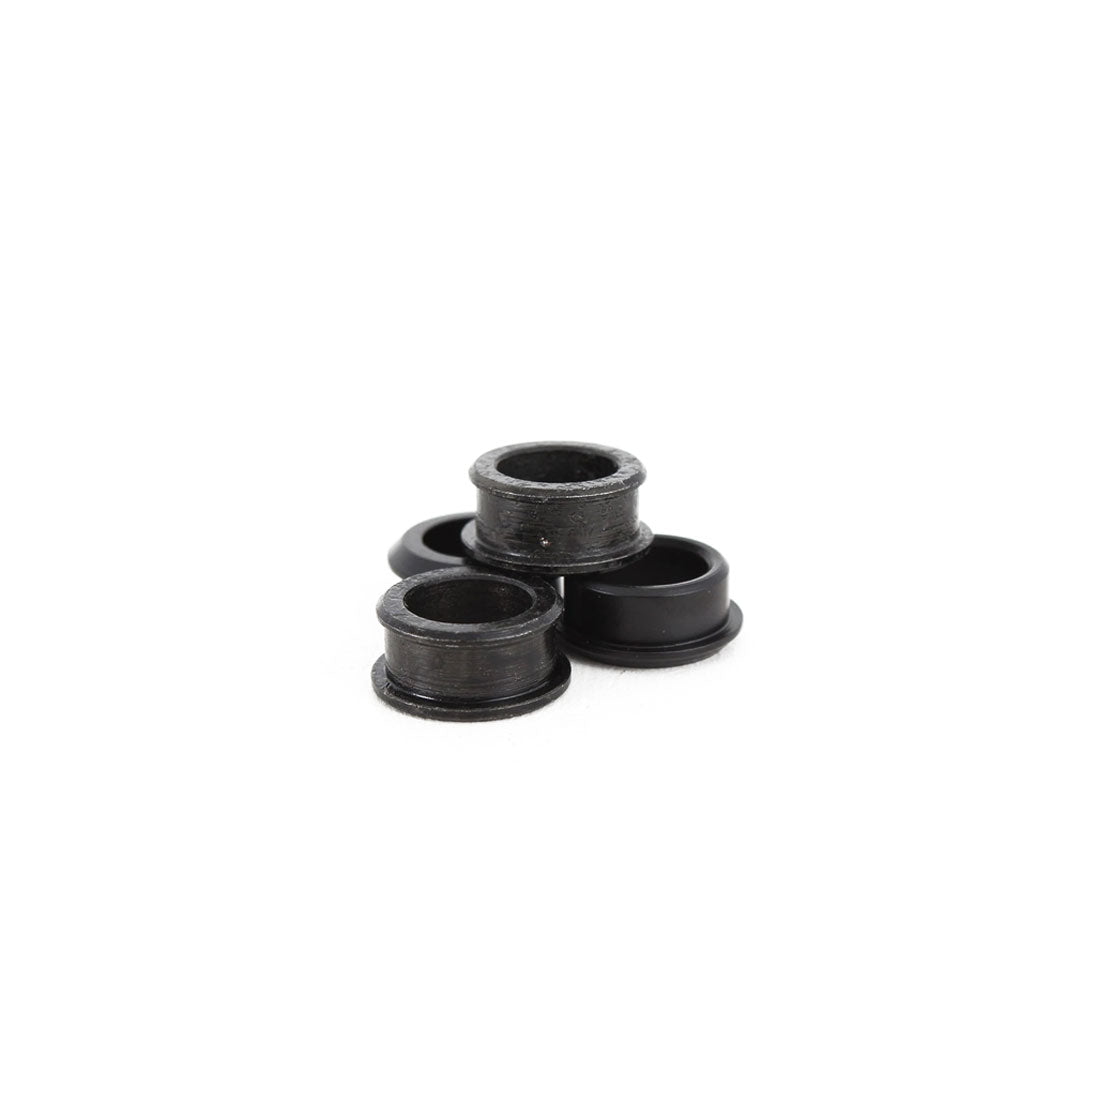 Envy 30mm Wheel Spacers 4pk Scooter Hardware and Parts